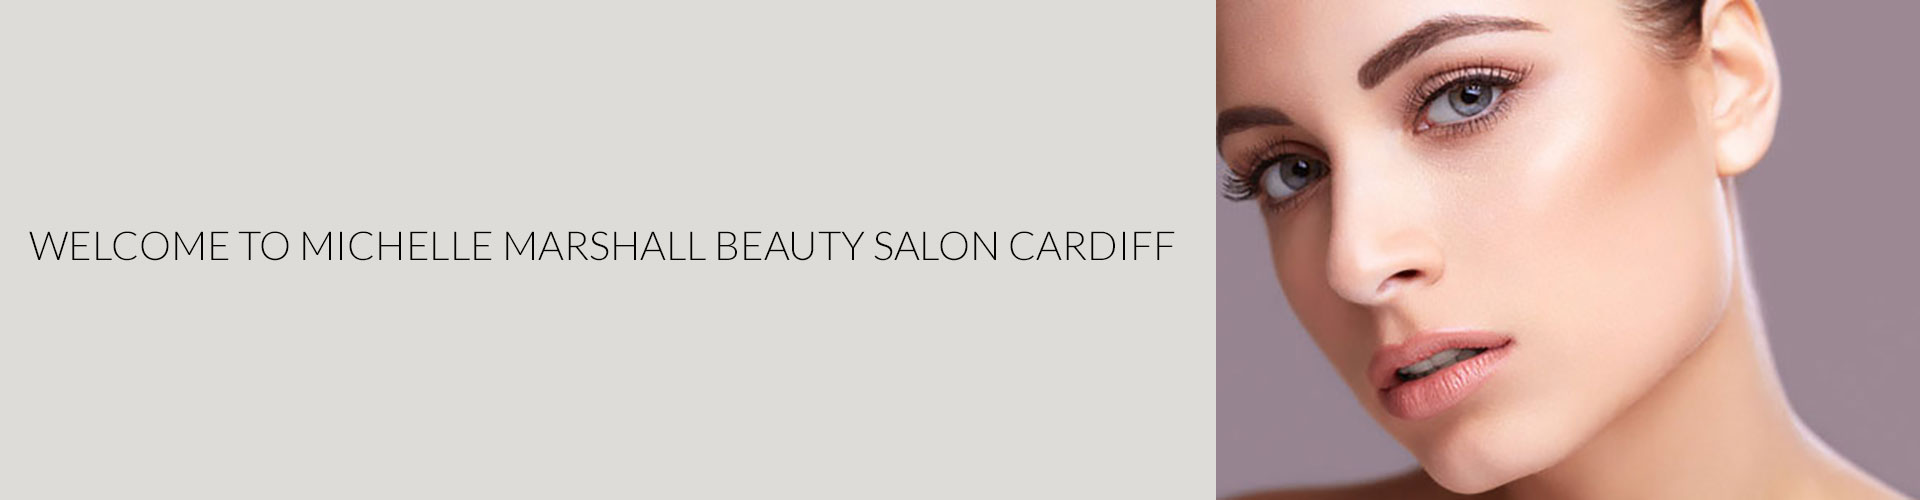 Welcome to Michelle Marshall Beauty Salon Cardiff 